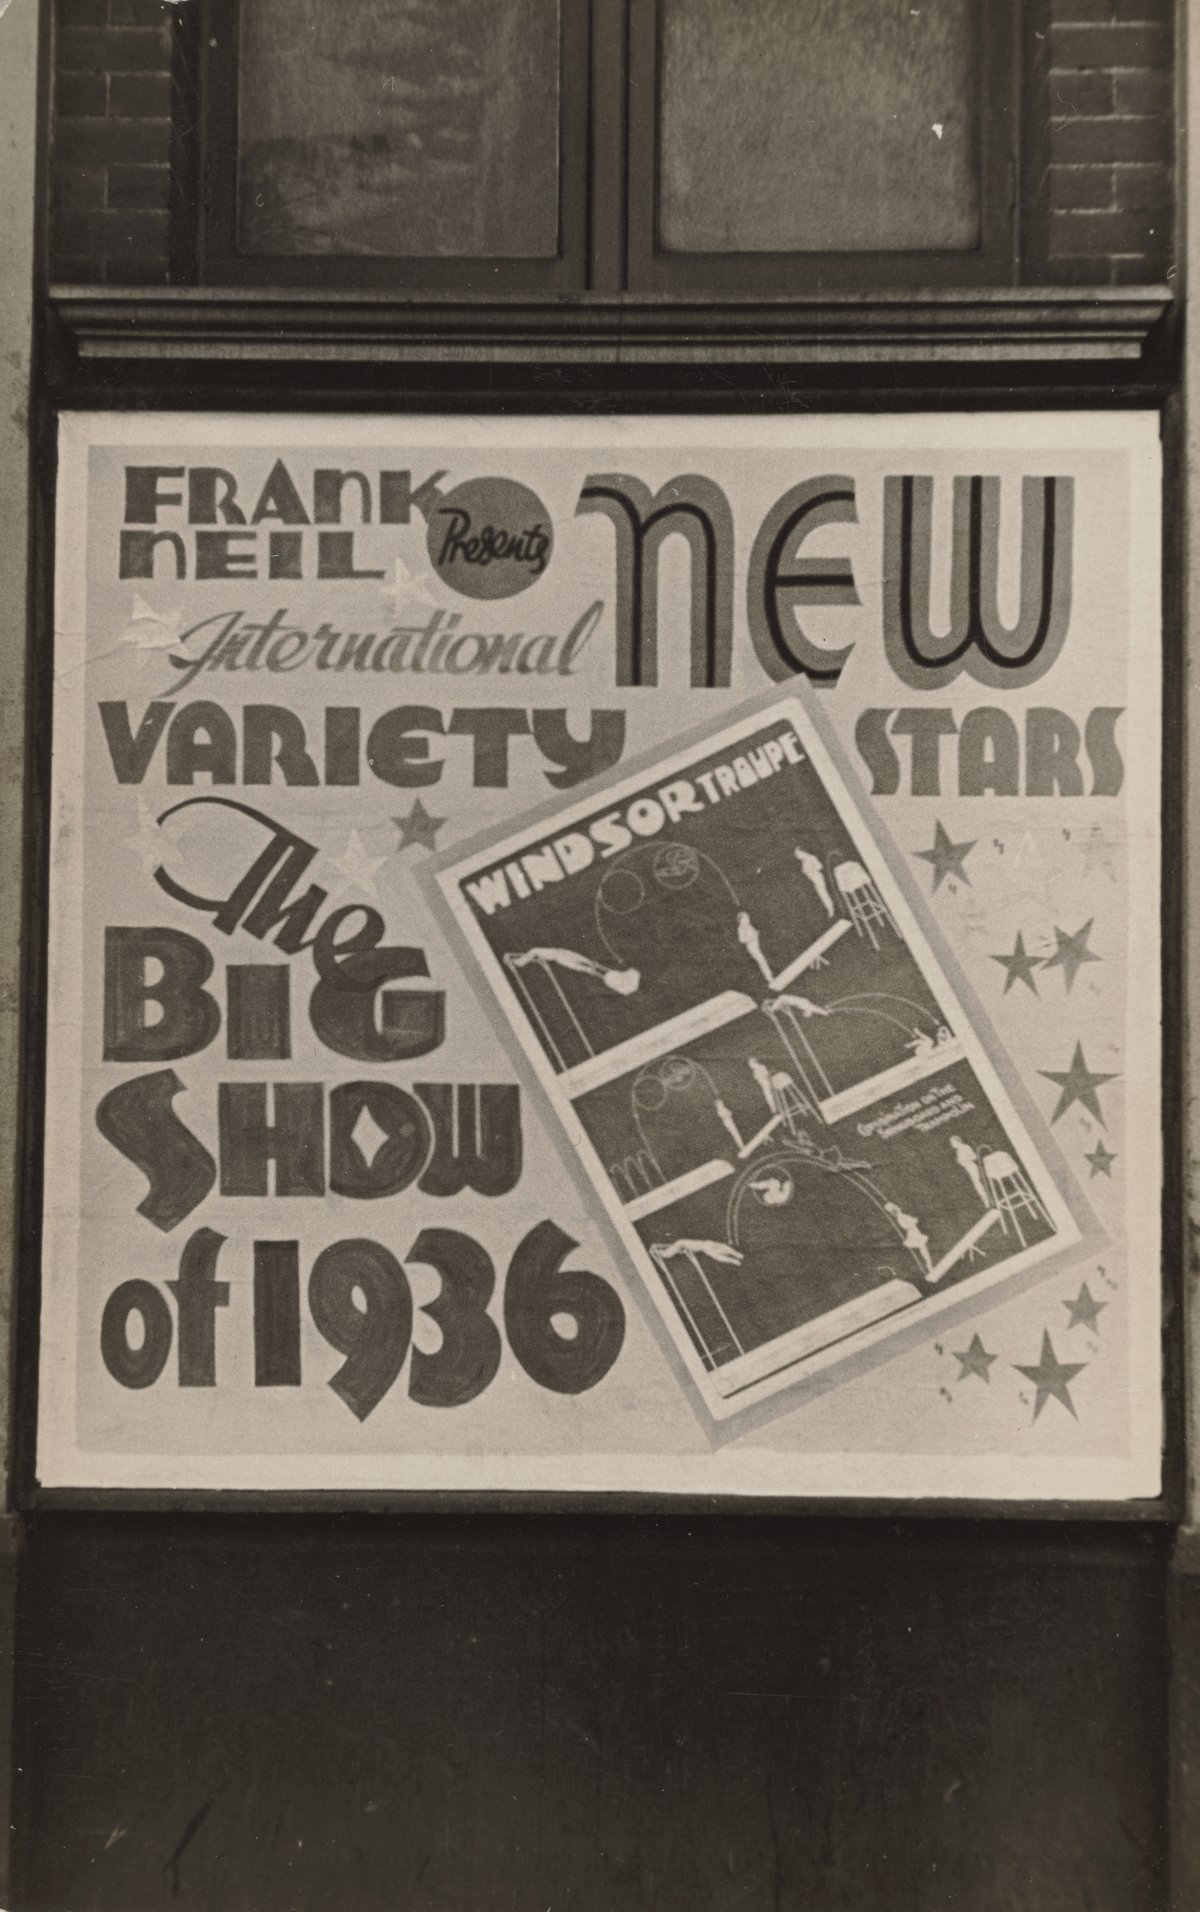 A black and white photograph of a billboard advertising the "Big Show of 1936", a variety performance